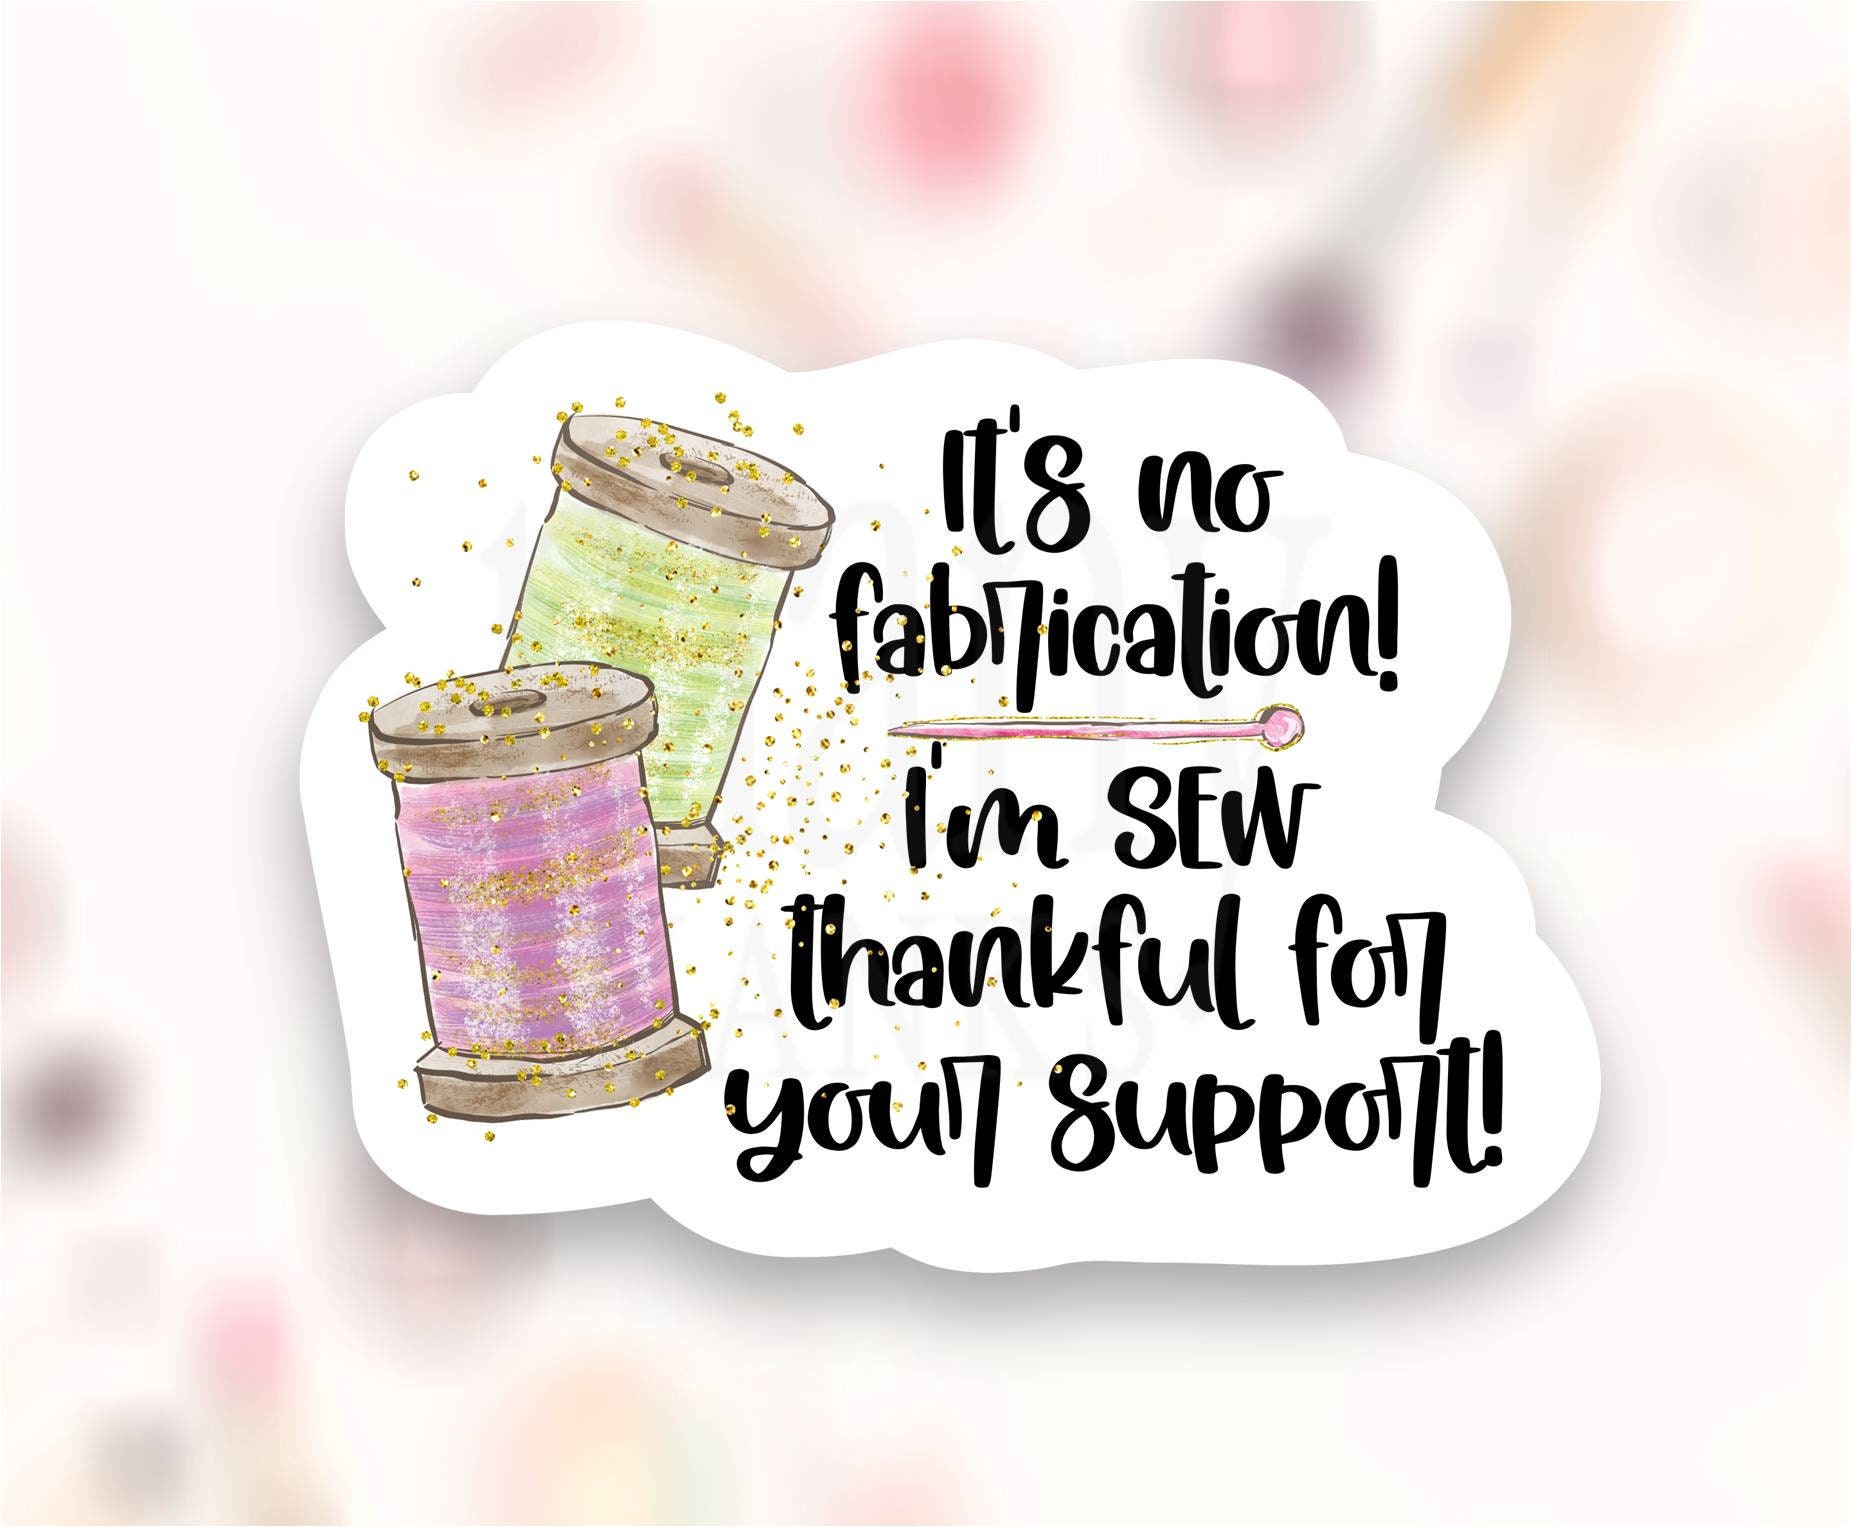 Thank You Sew Much Cute Sewing Small Business Package Stickers